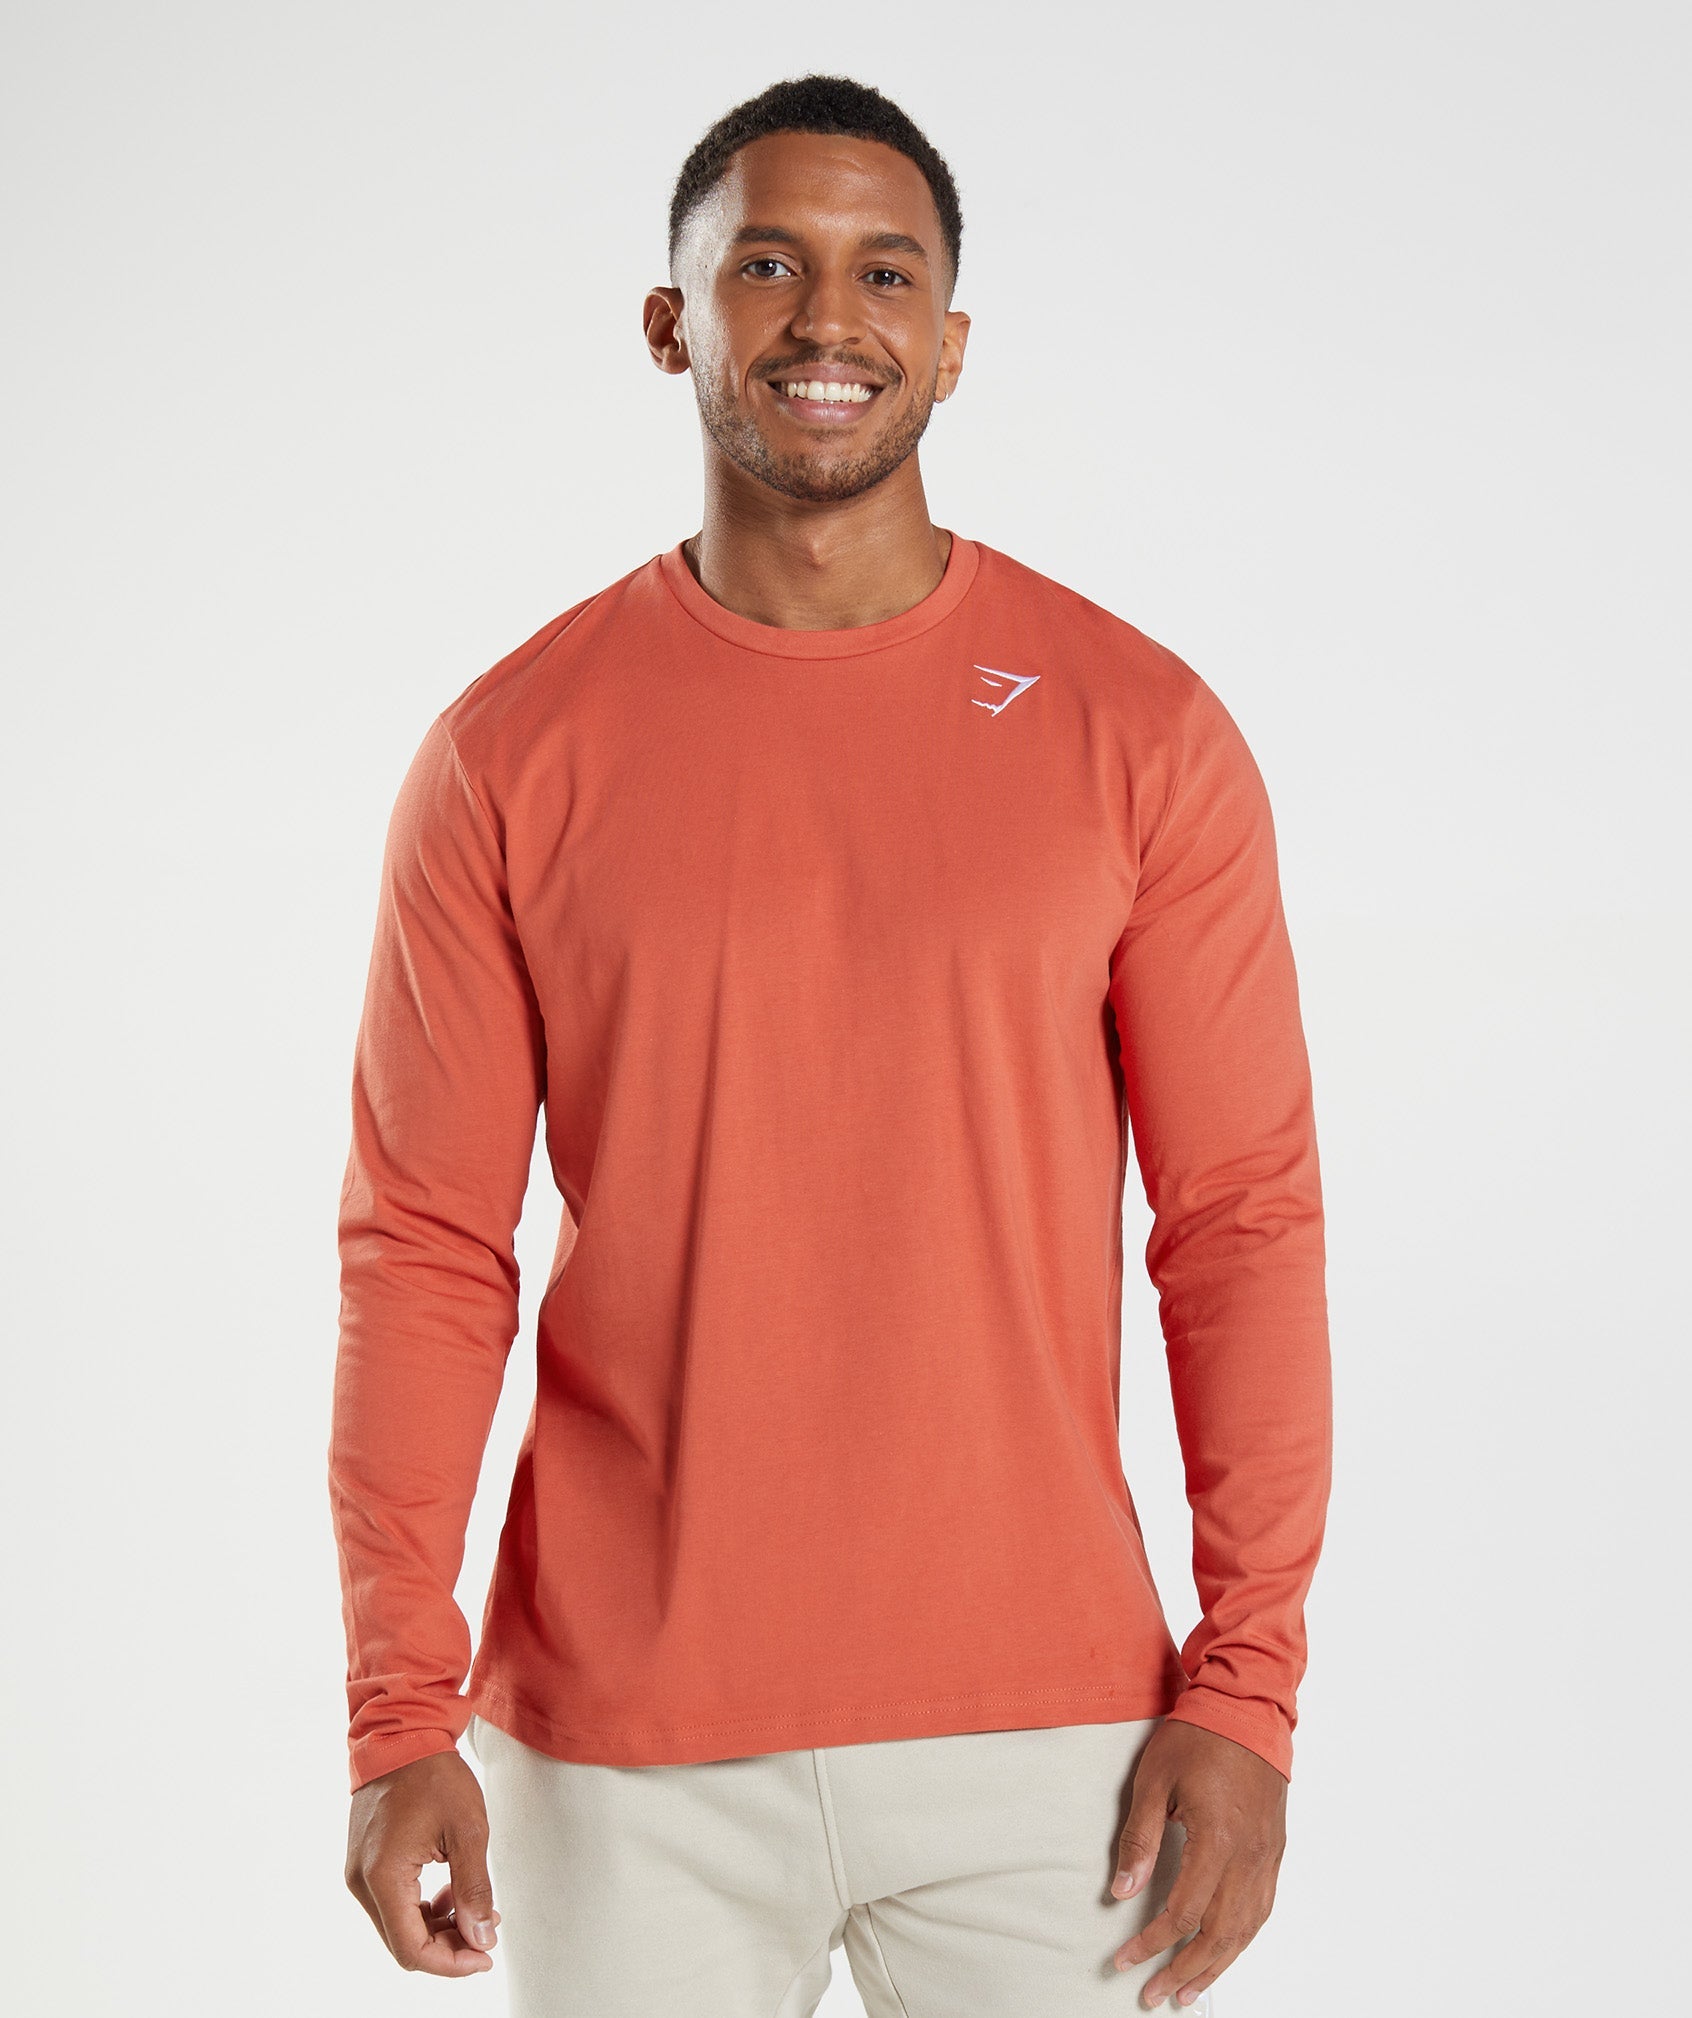 Crest Long Sleeve T-Shirt in Storm Red - view 1